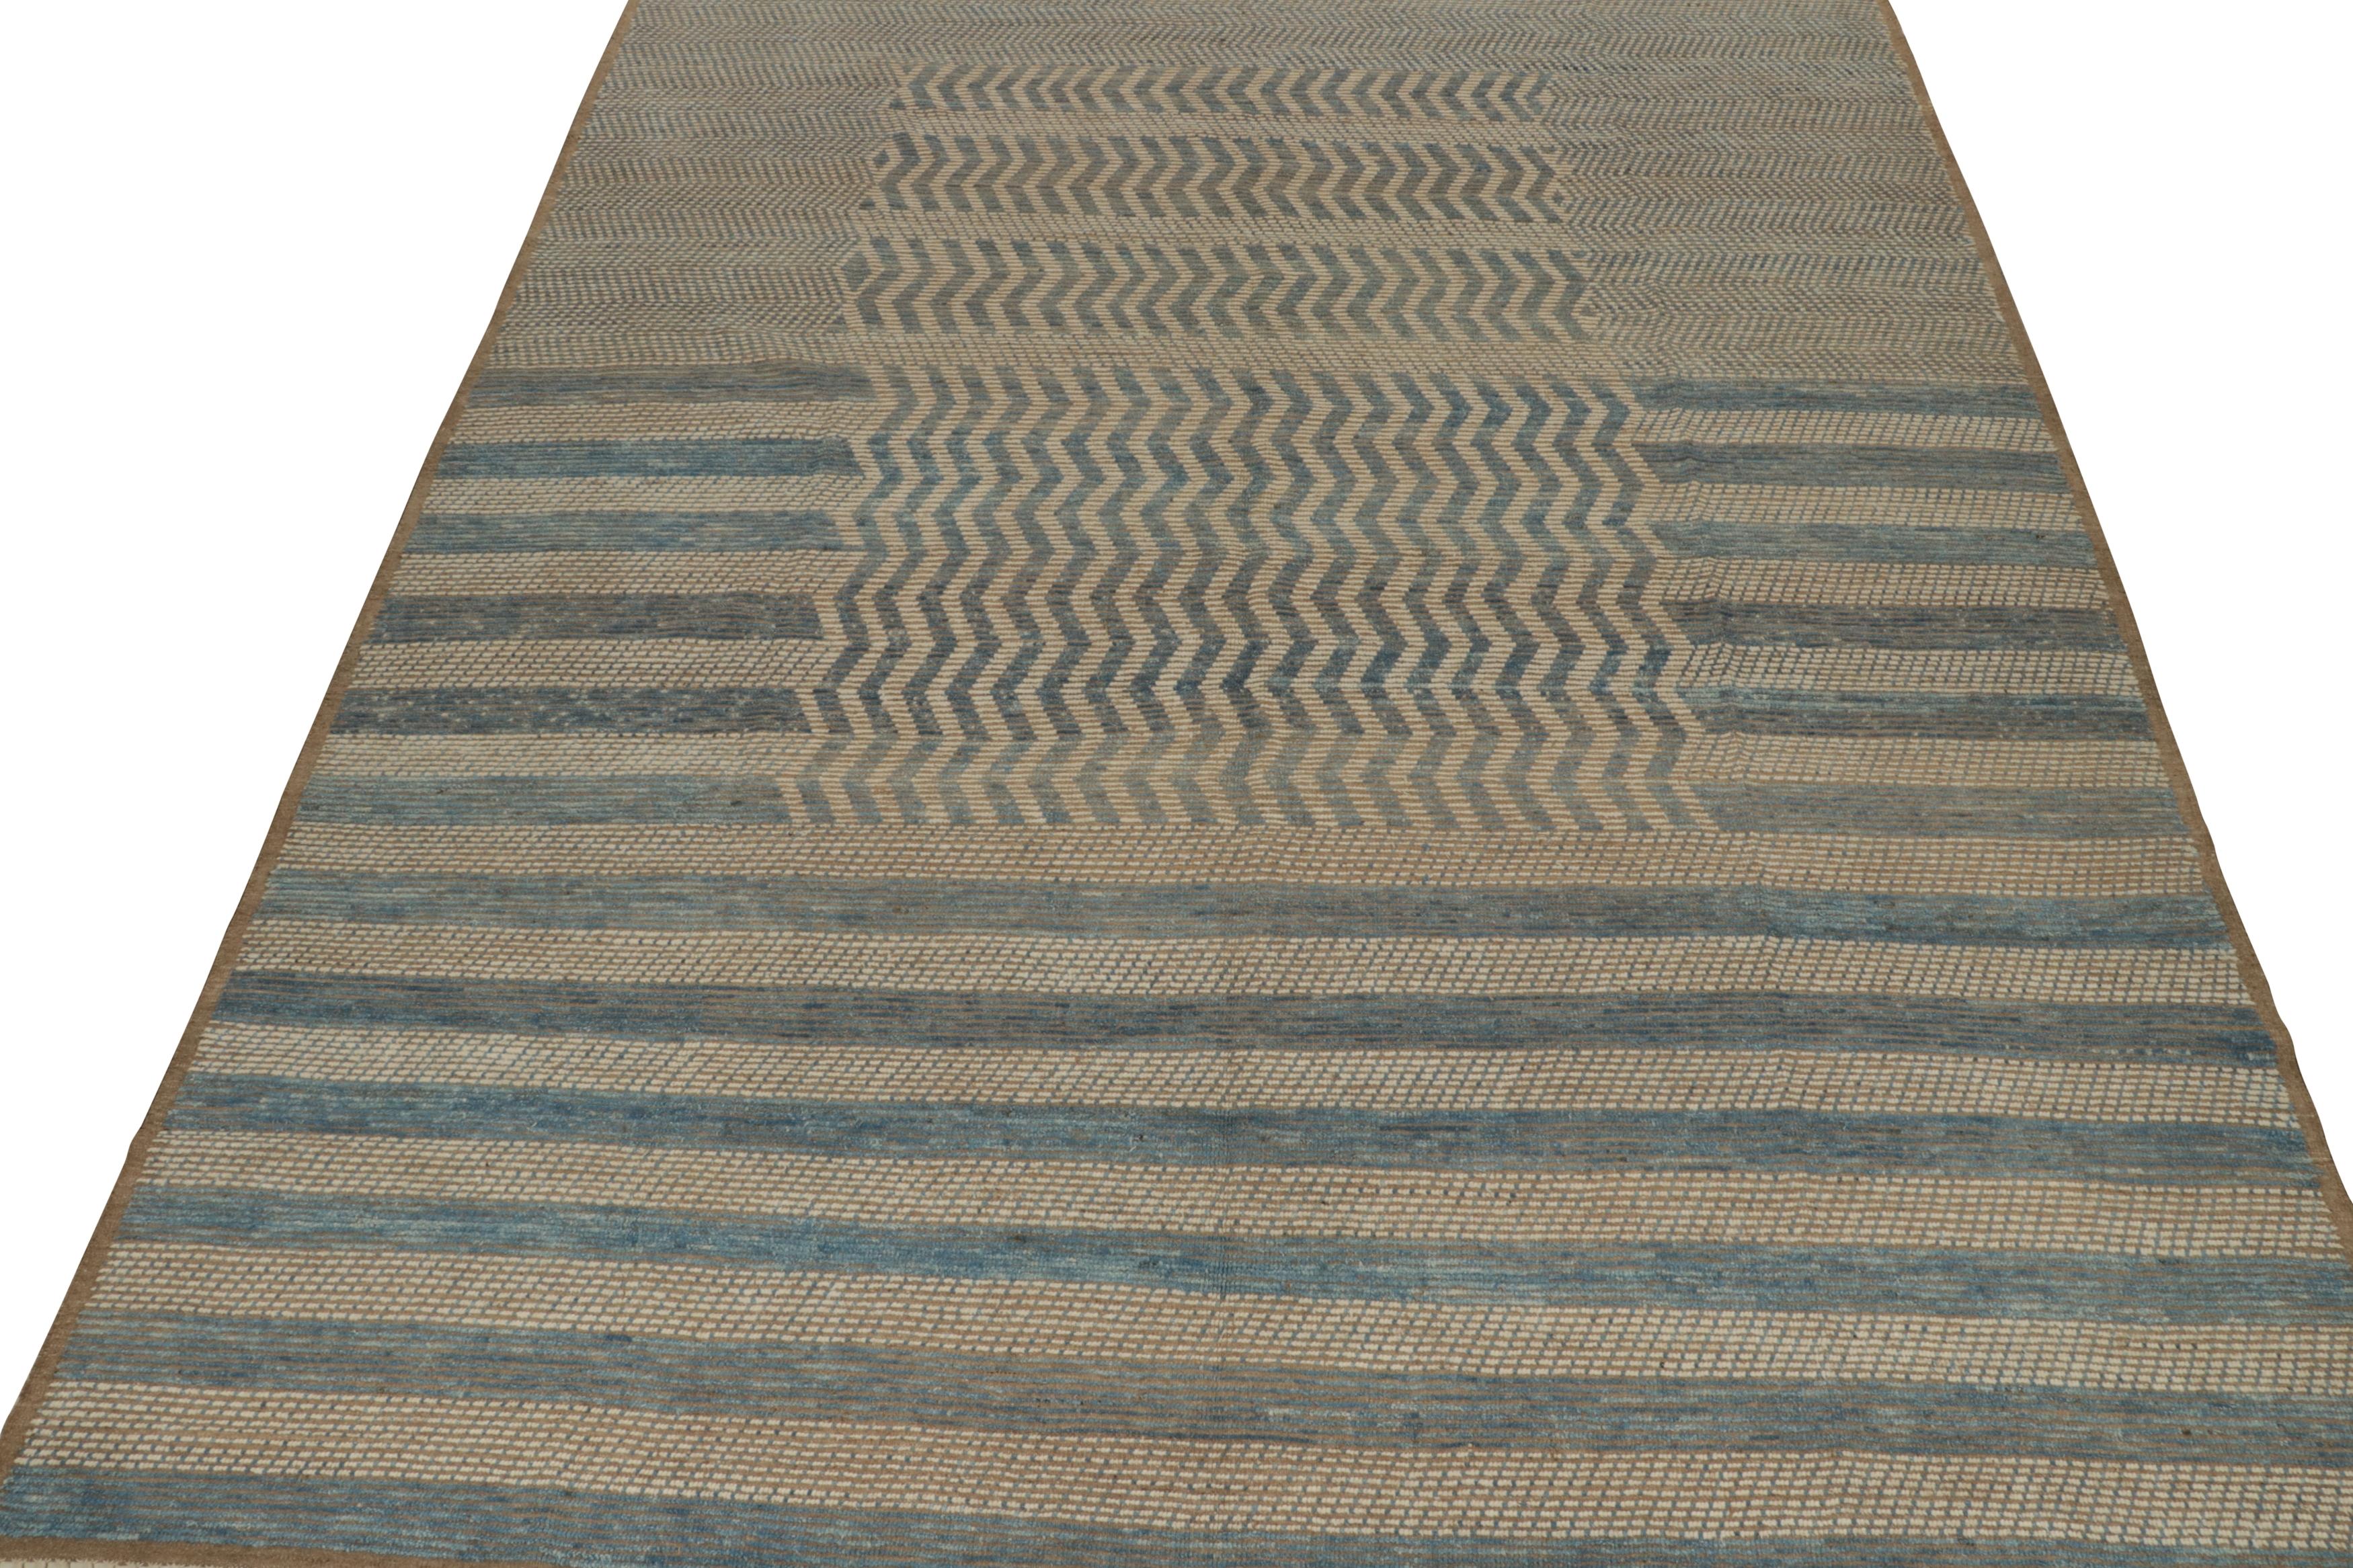 Afghan Rug & Kilim’s Moroccan Style Rug in Beige-Brown and Blue Stripes and Chevrons For Sale